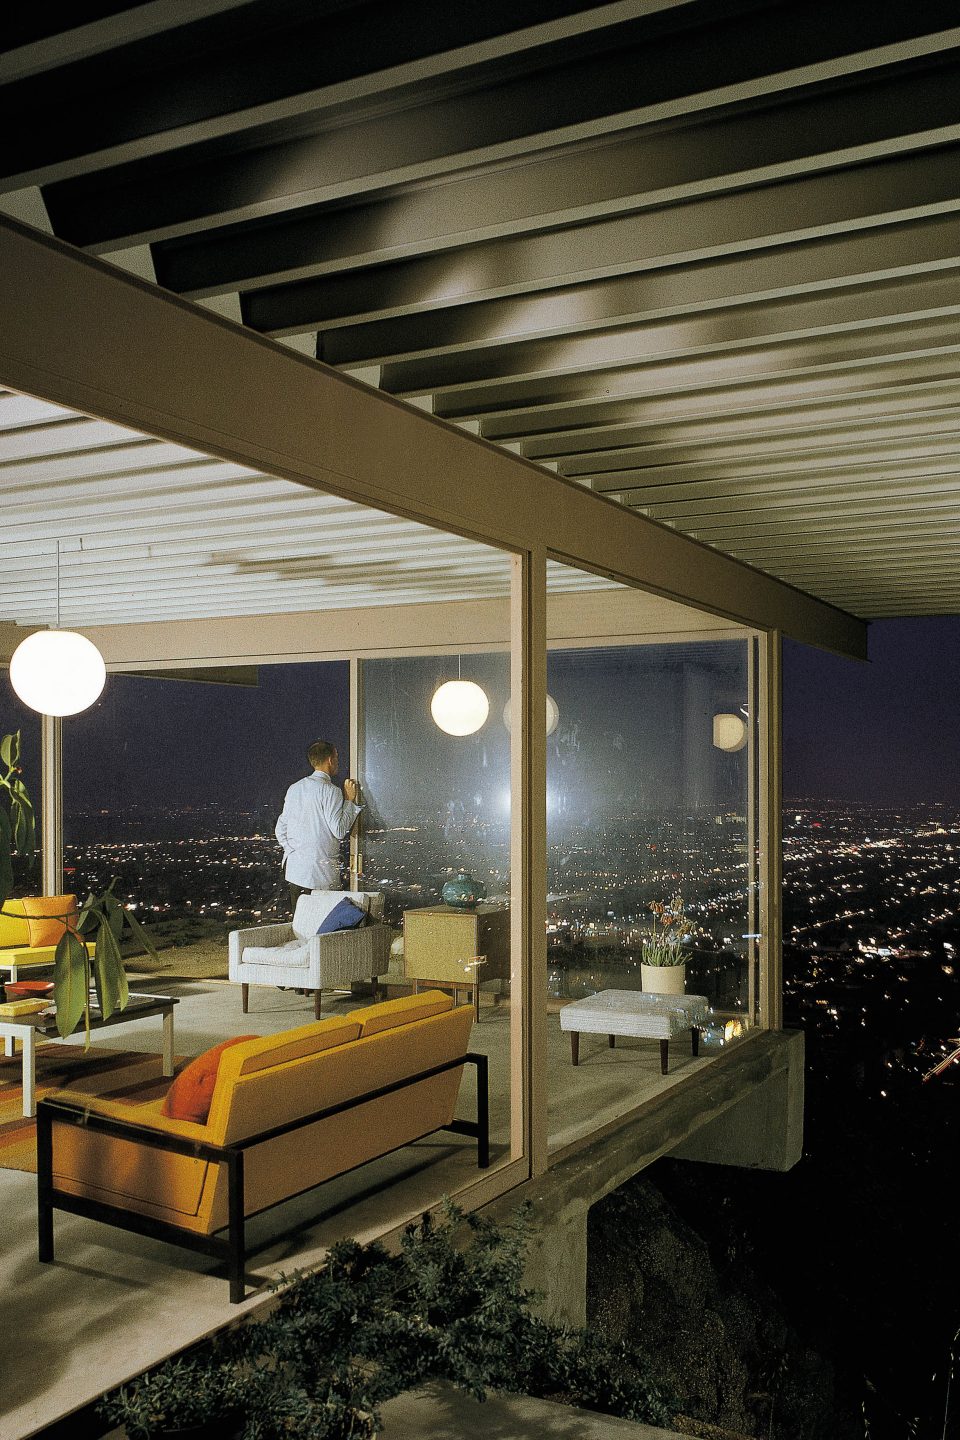 Enjoy a Celebration of the Case Study Houses That Brought Innovation to Postwar Los Angeles